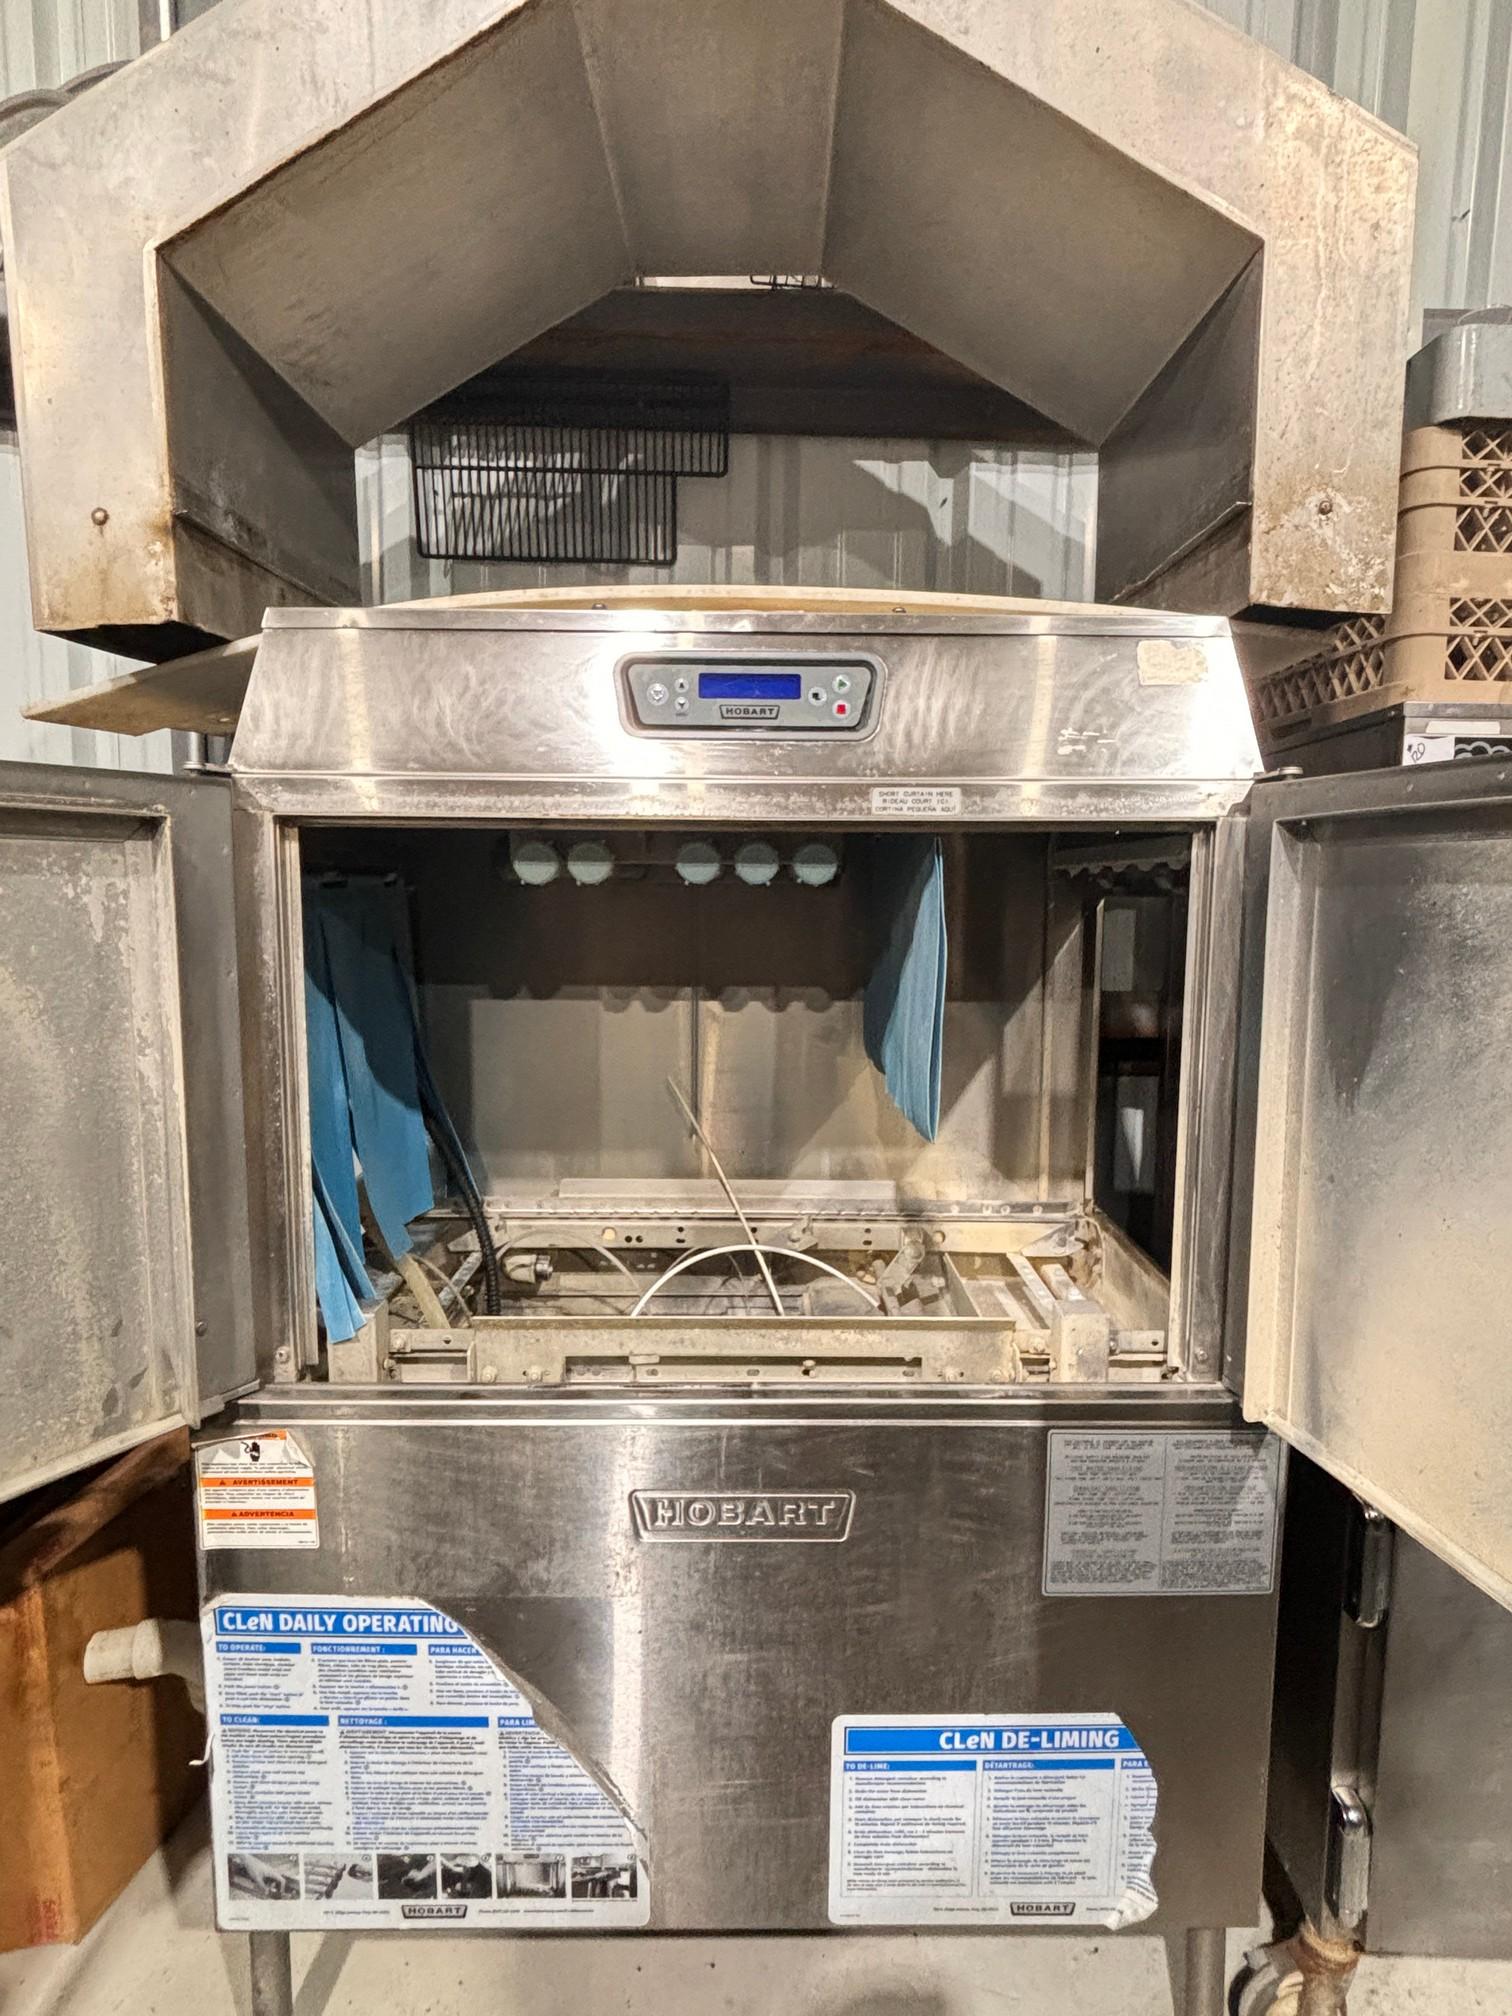 Hobart S.S. Double Pass Through Dishwashing System with Vent Hood